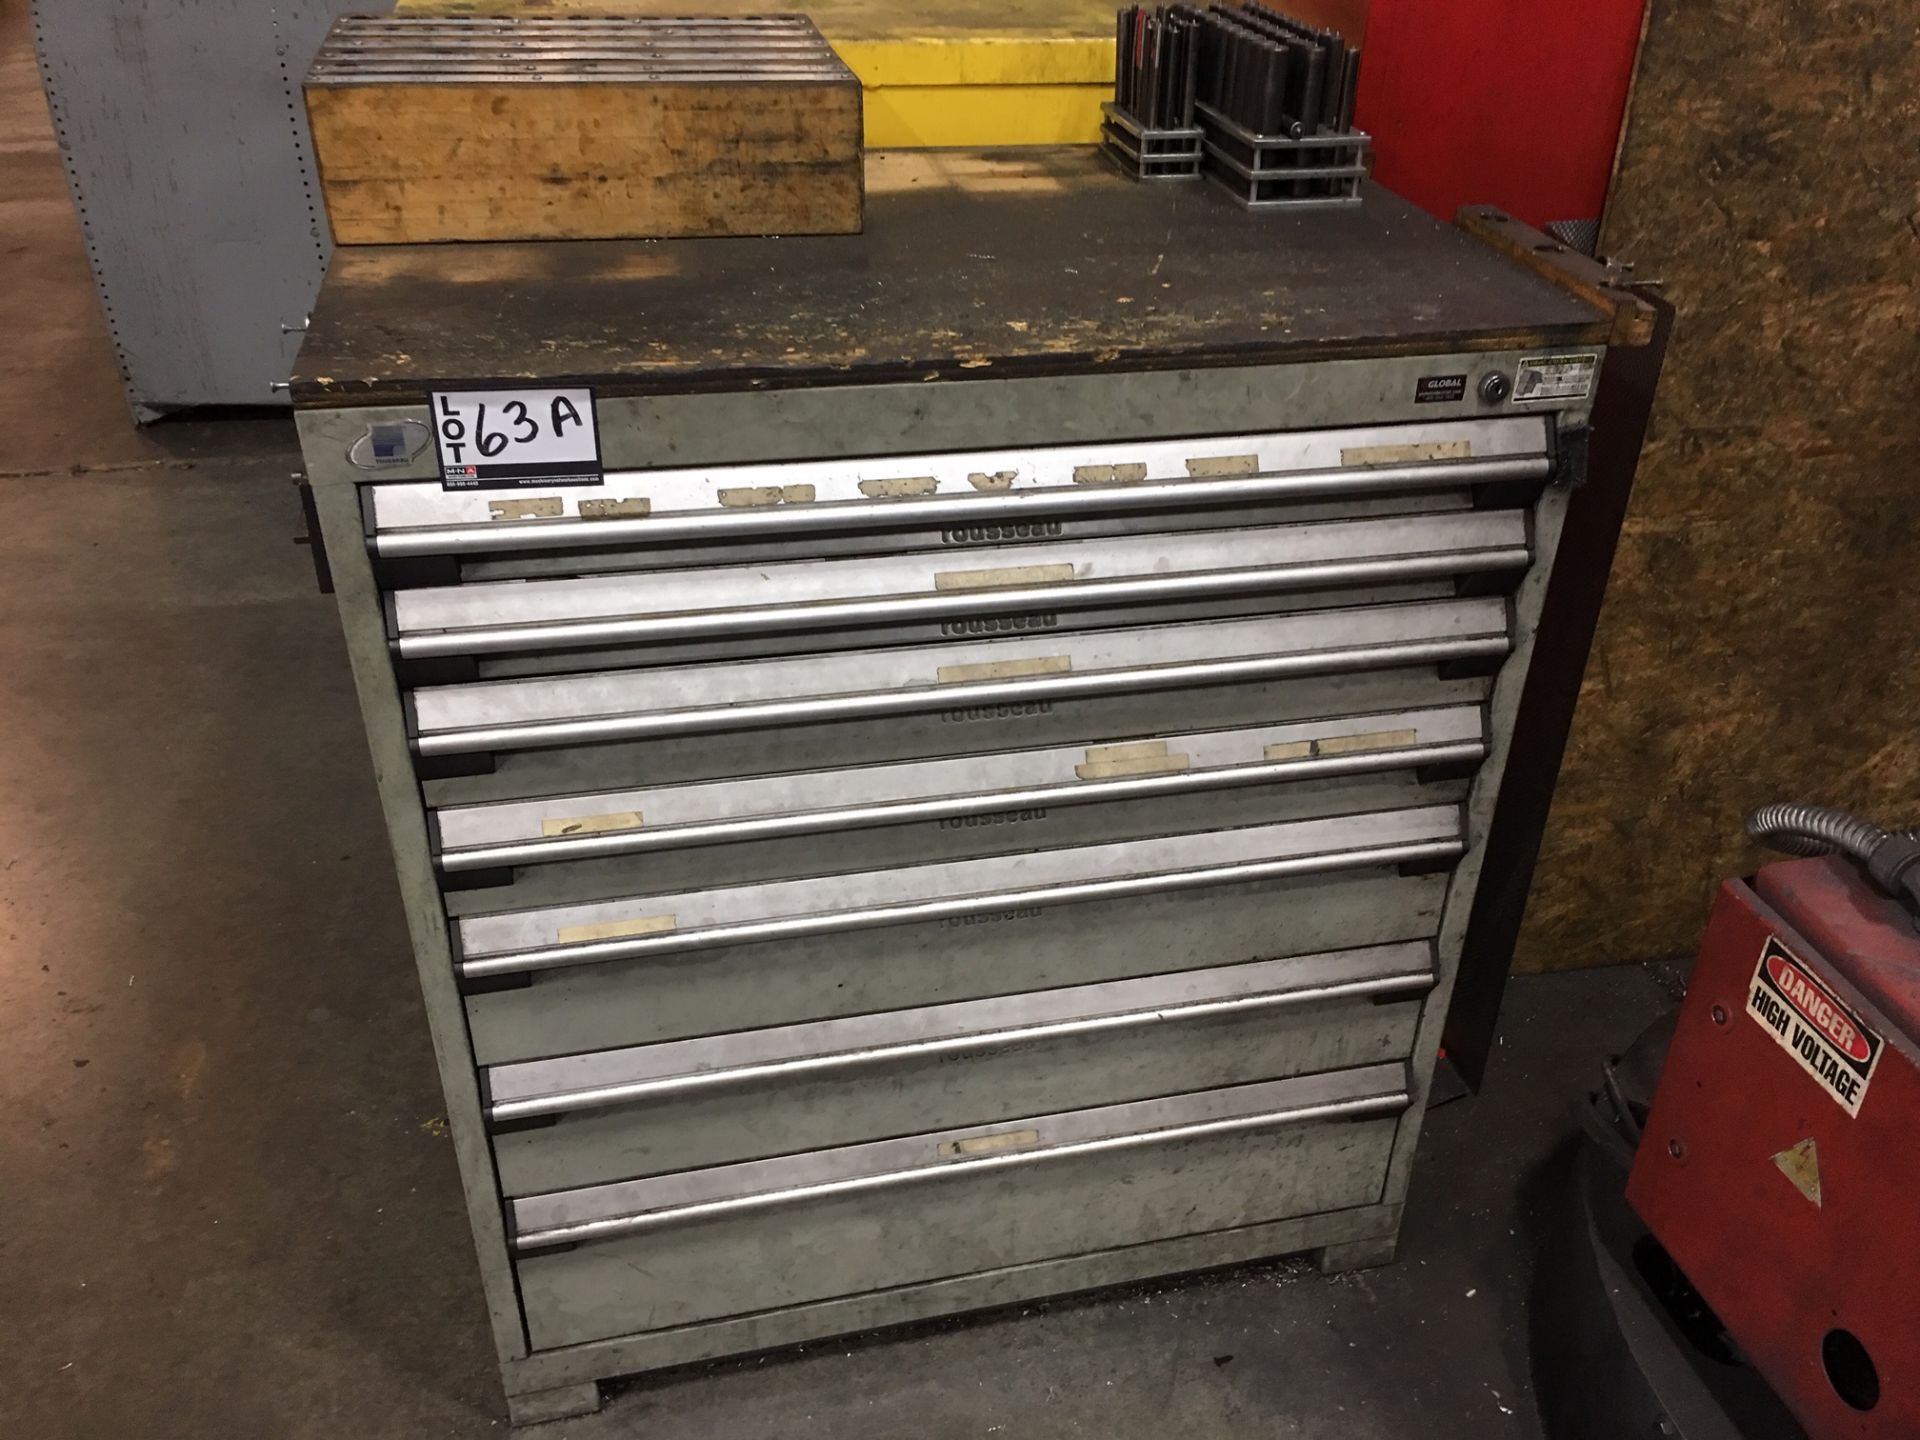 7 Drawer Global Cabinet w/ Drills, Bolts, and Reamers